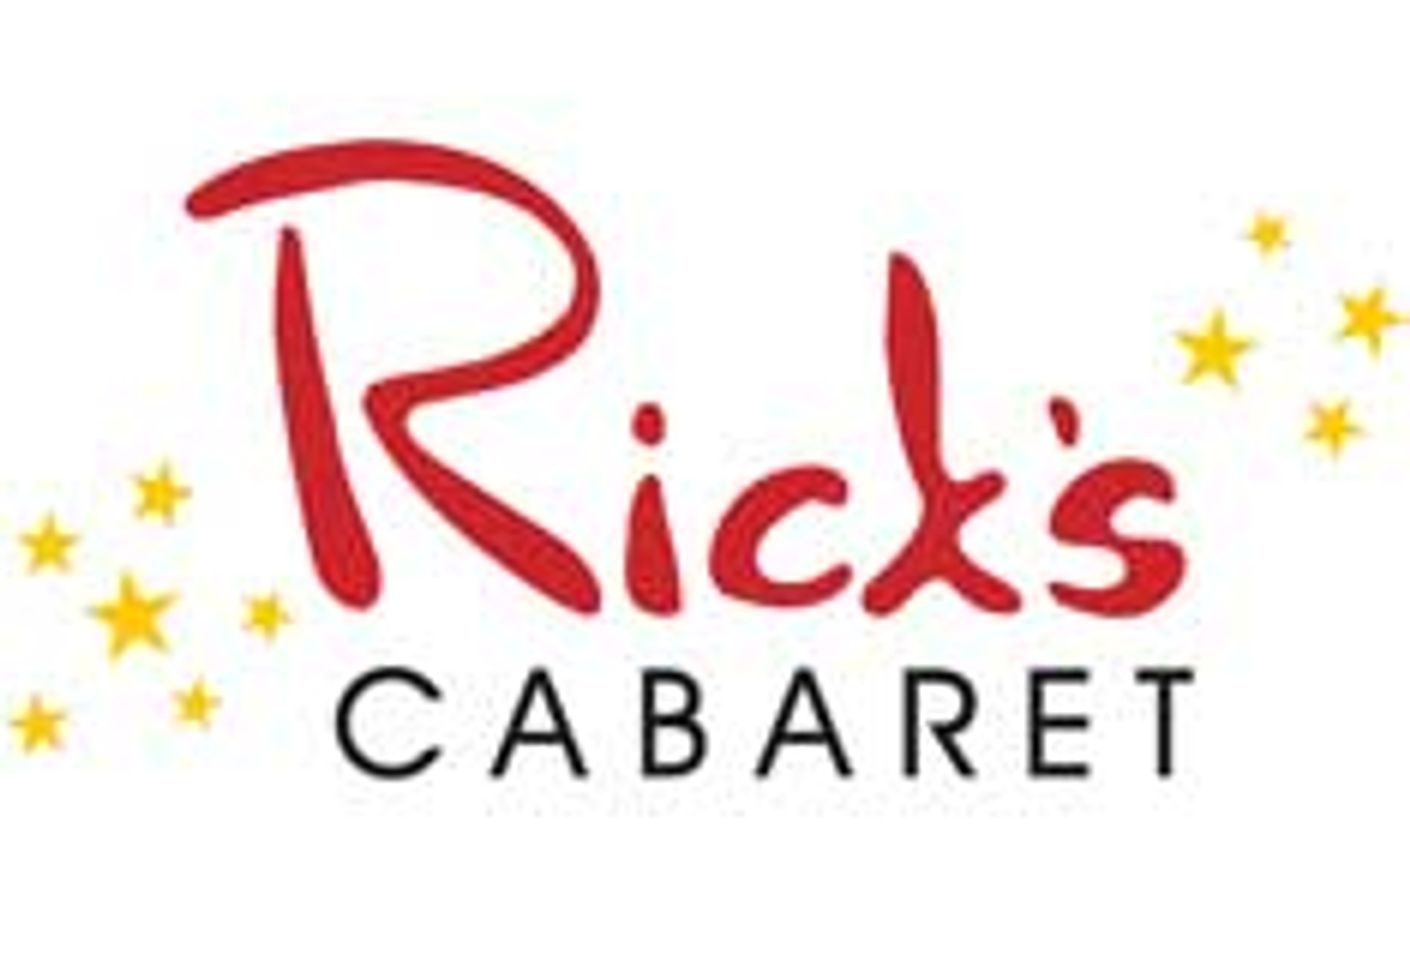 Rick’s Cabaret Subsidiaries Complete Acquisition of Silver City Cabaret in Dallas